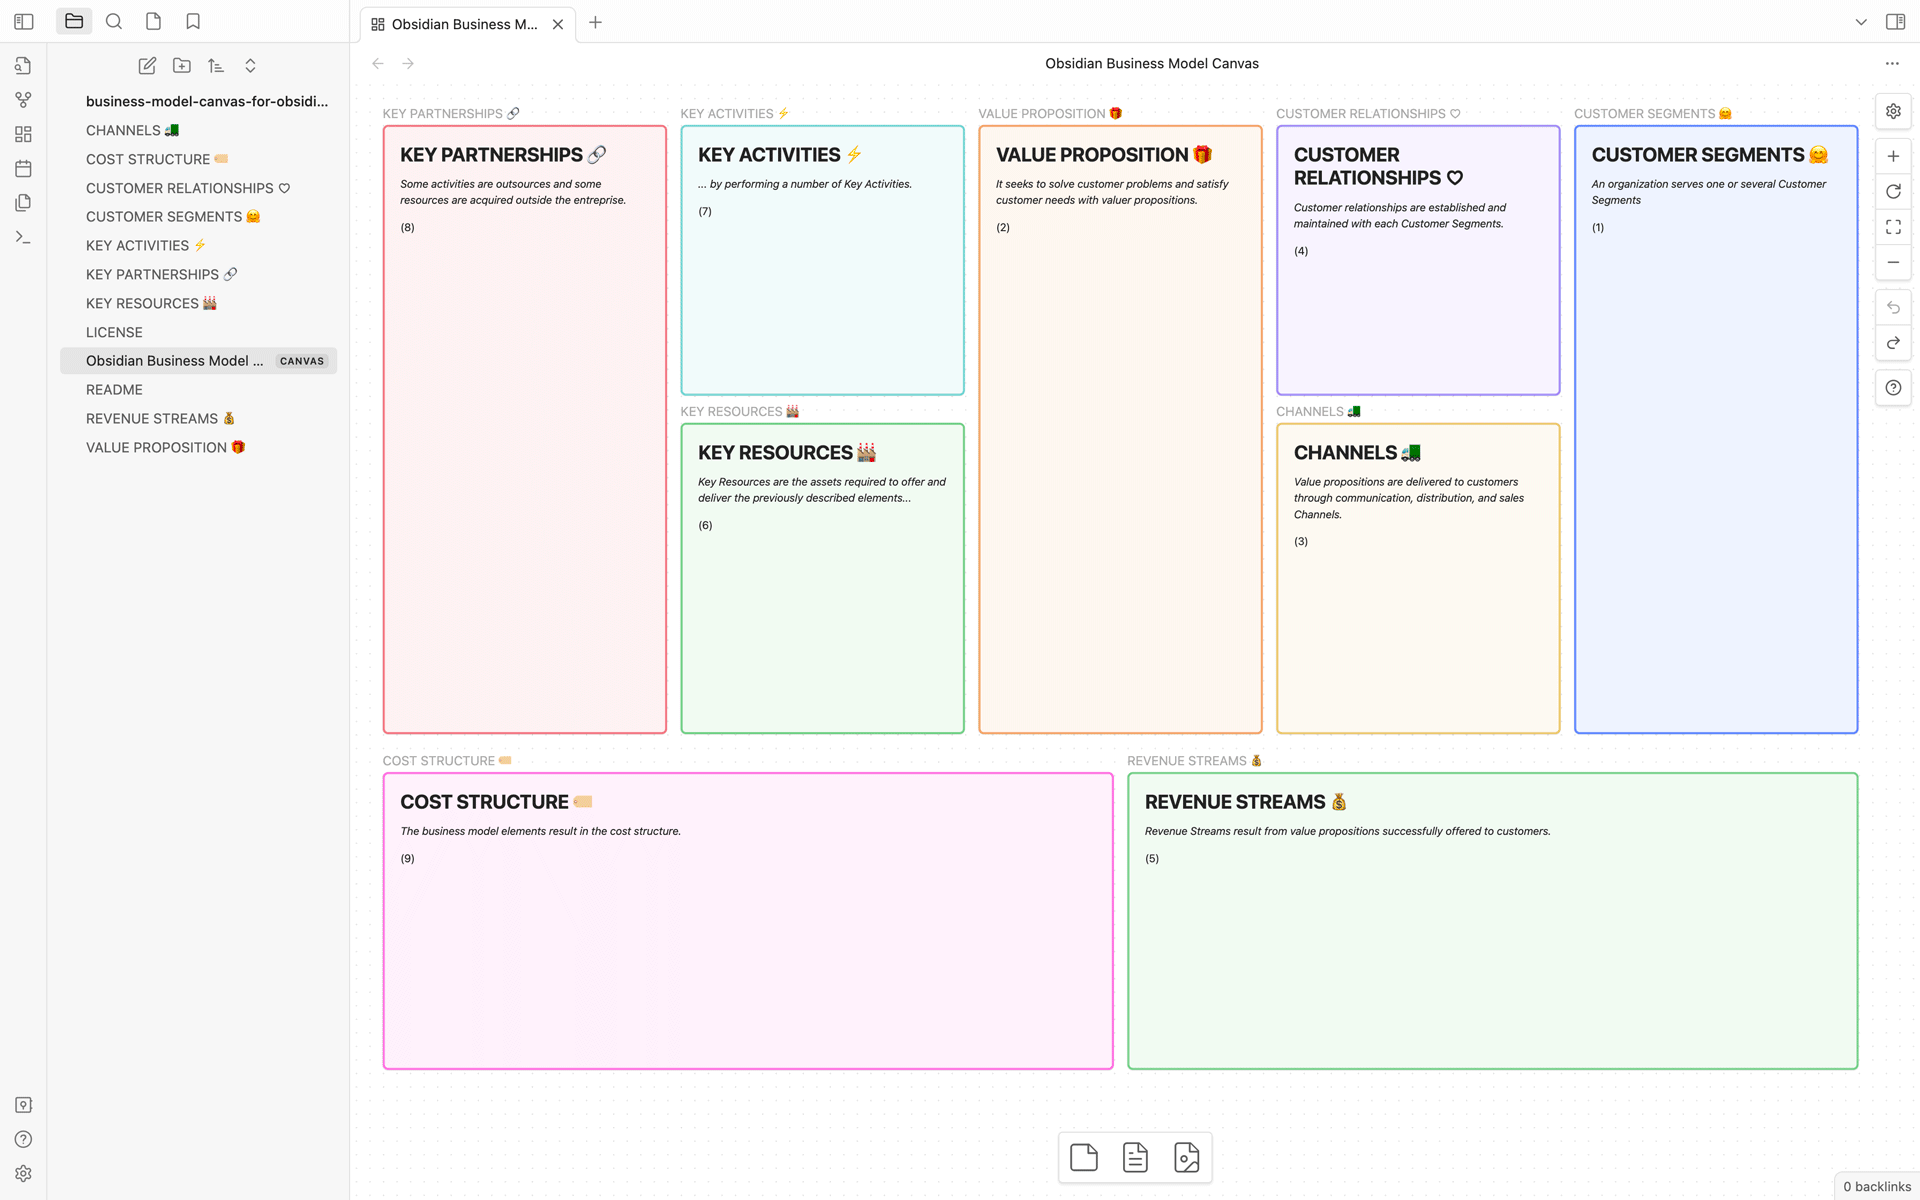 Business Model Canvas Template for Obsidian, a one-page business plan template for Obsidian